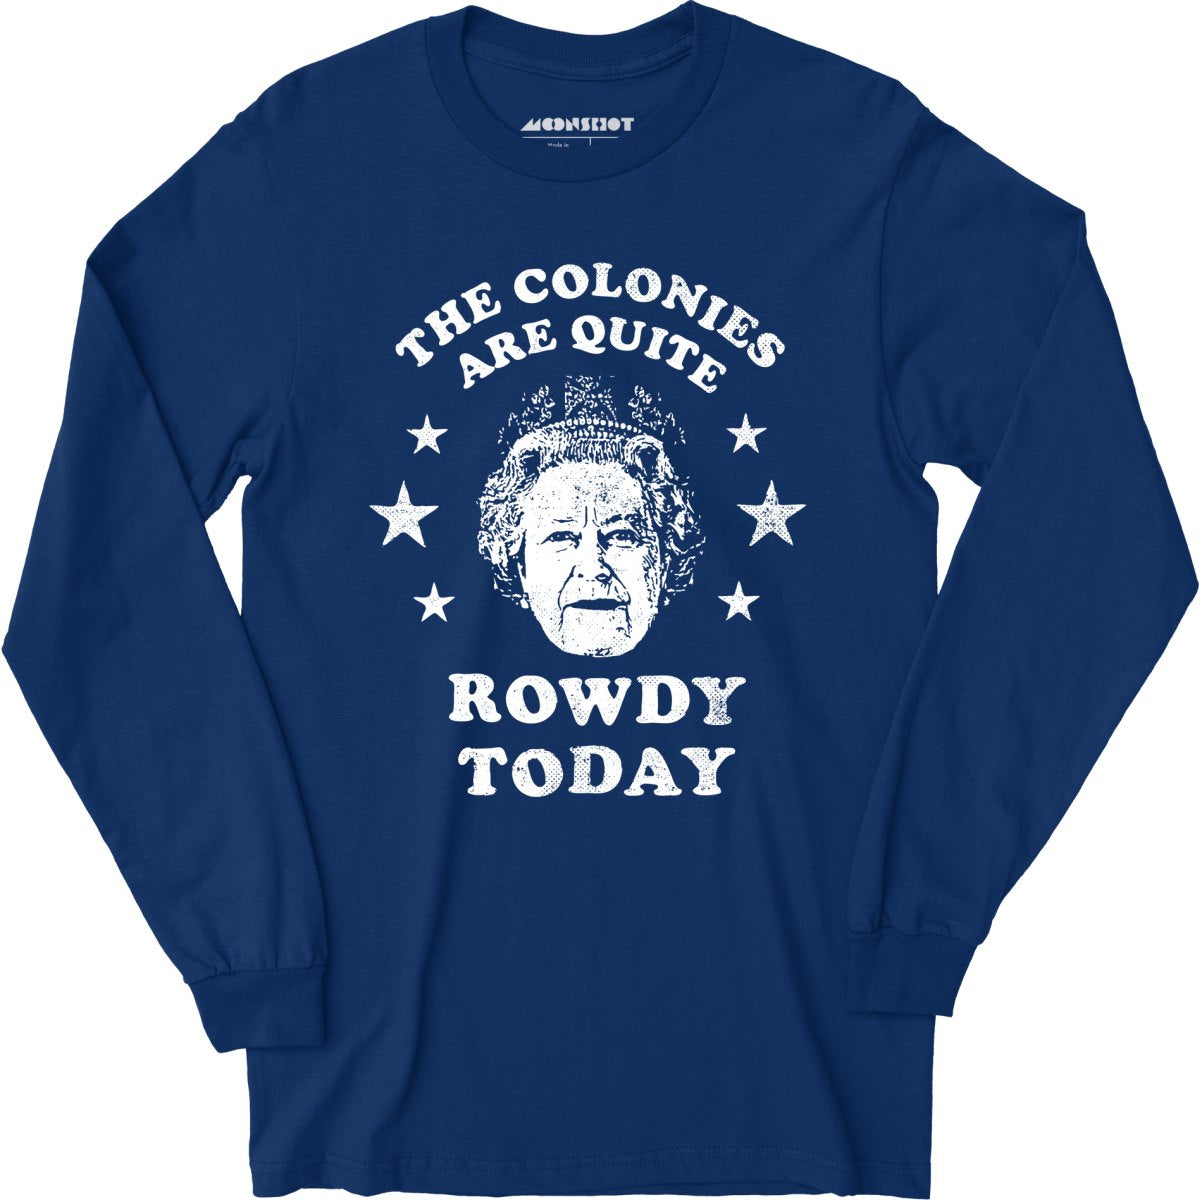 The Colonies Are Quite Rowdy Today - Long Sleeve T-Shirt